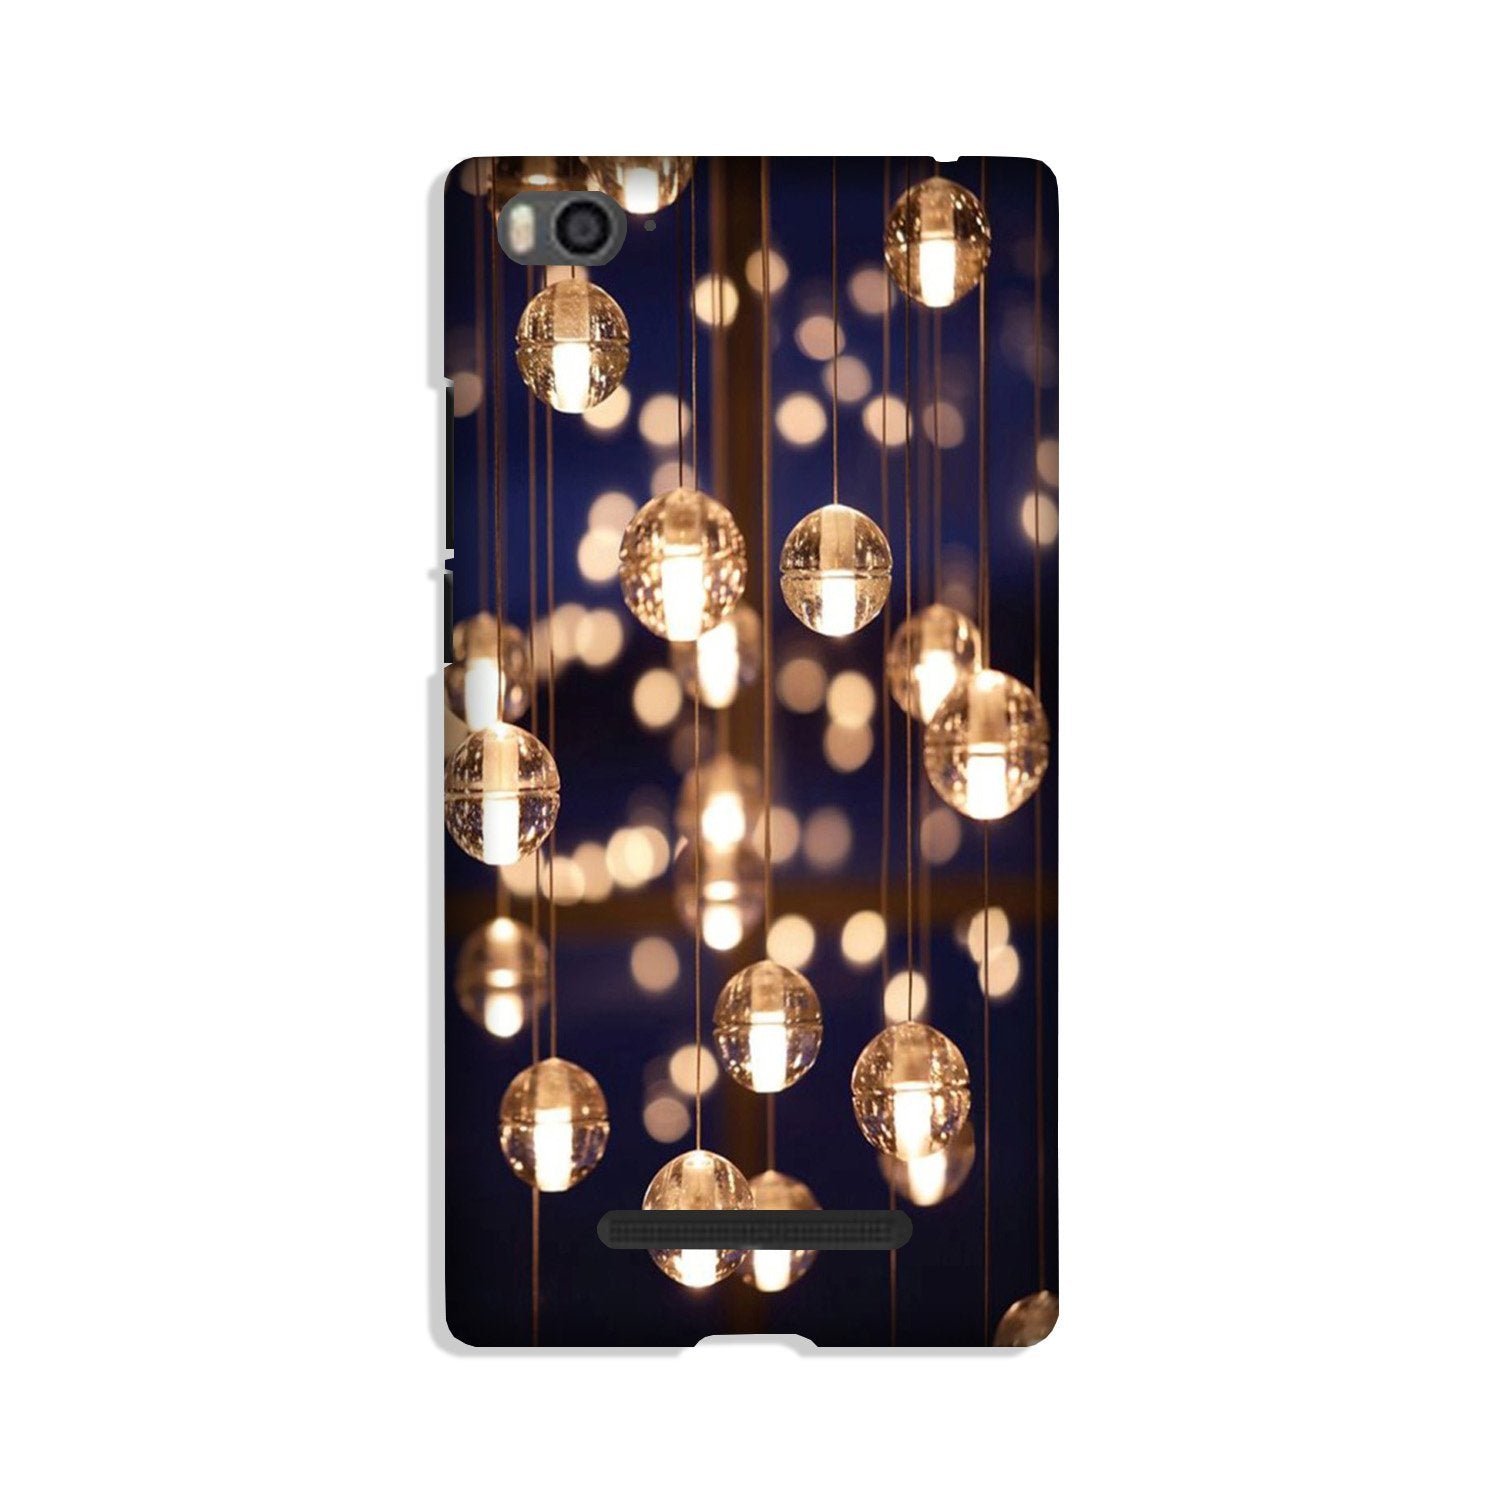 Party Bulb2 Case for Redmi 4A